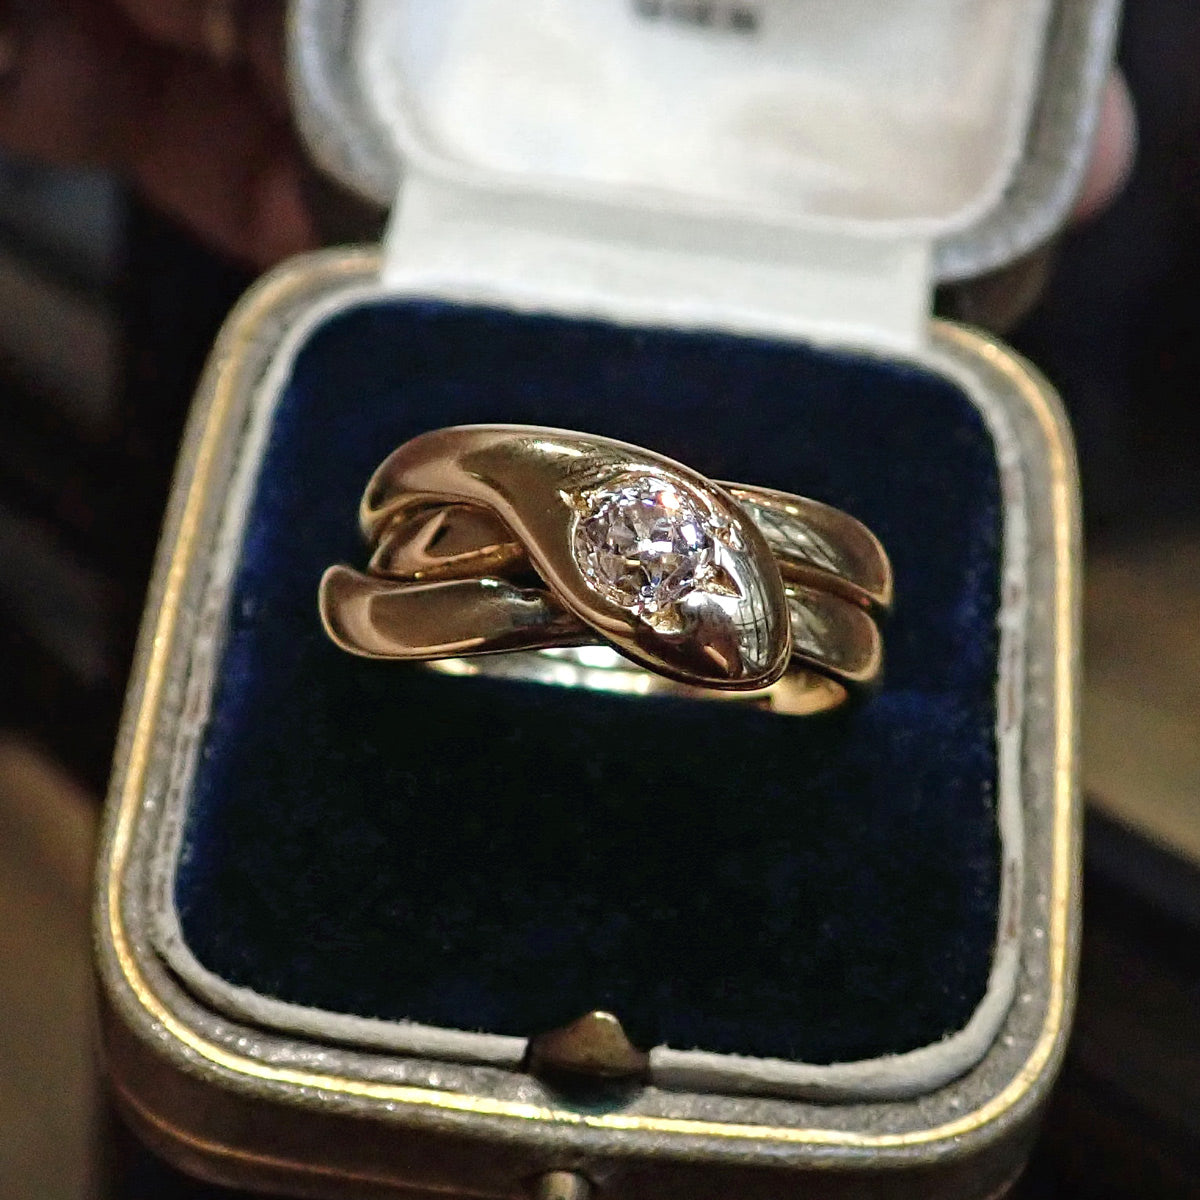 Victorian ring: a Yellow Gold Snake Old European Diamond Engagement ring sold by Doyle & Doyle a vintage and antique jewelry store.